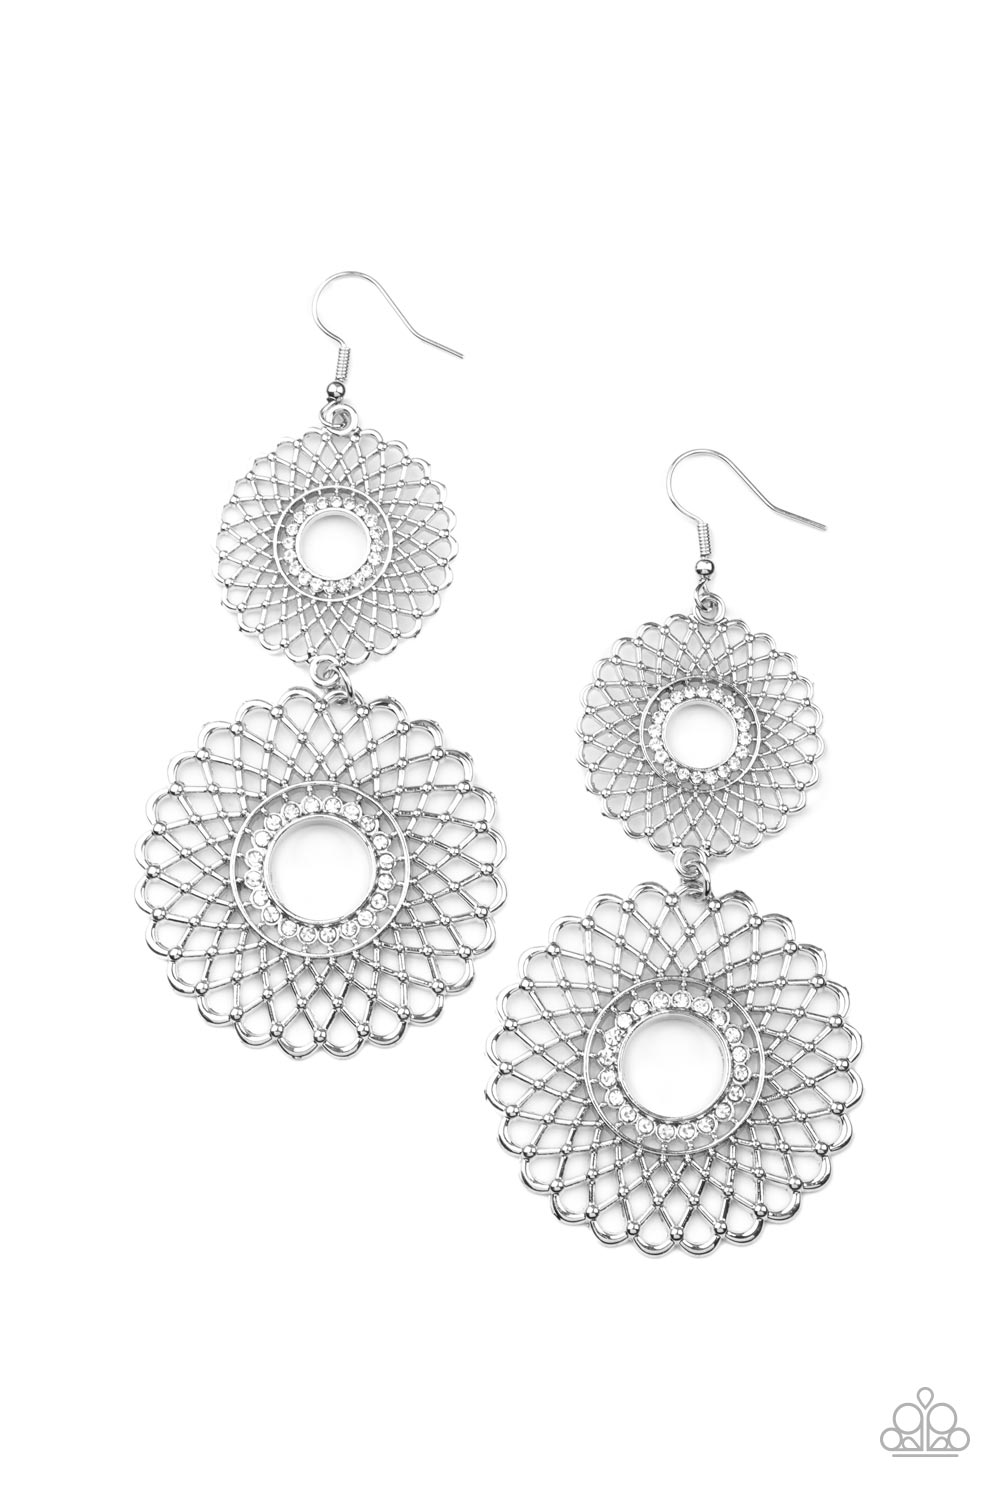 Airy silver petals infinitely overlap into two dizzying silver floral medallions